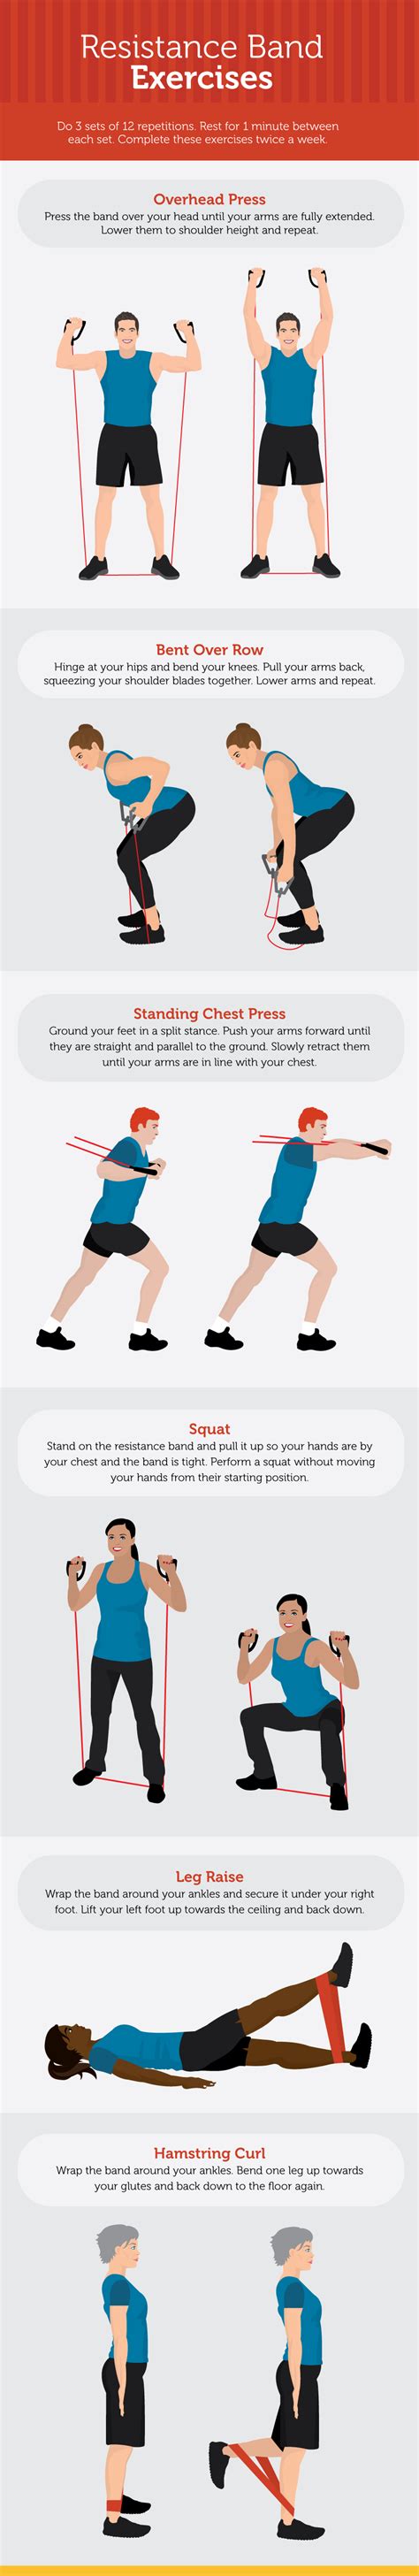 How Resistance Bands Improve Your Workout